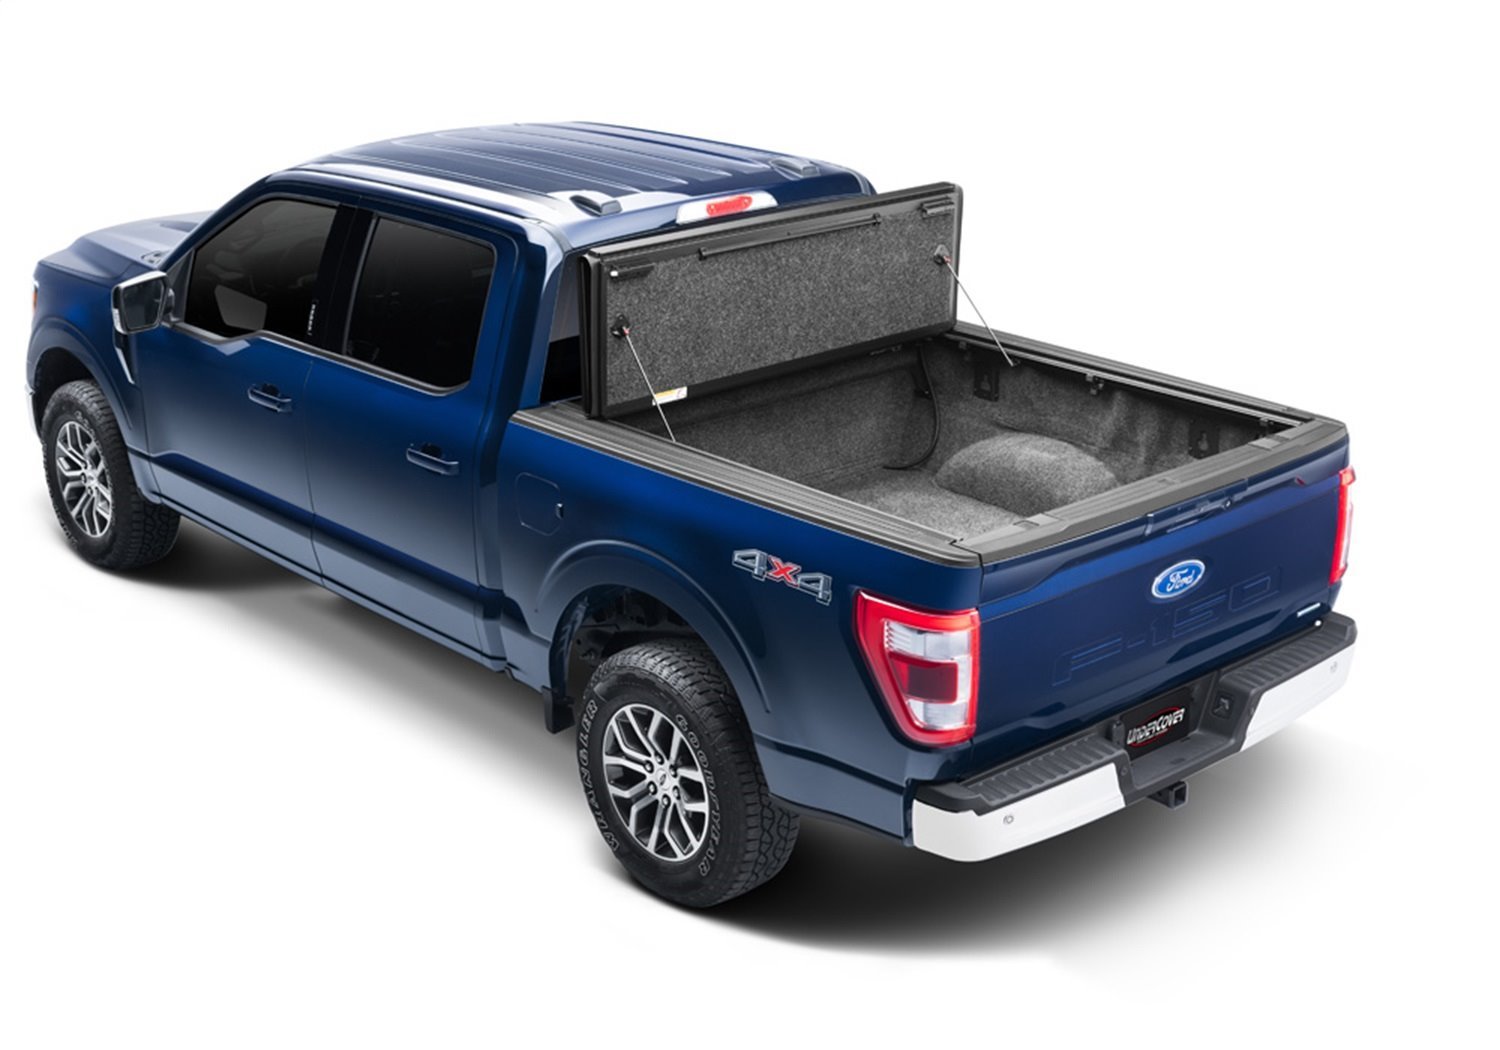 UX22029 Ultra Flex Hard Folding Cover, Fits Select Ford F-150 5'7" Bed Crew (Includes Lightning) Matte Black Finish